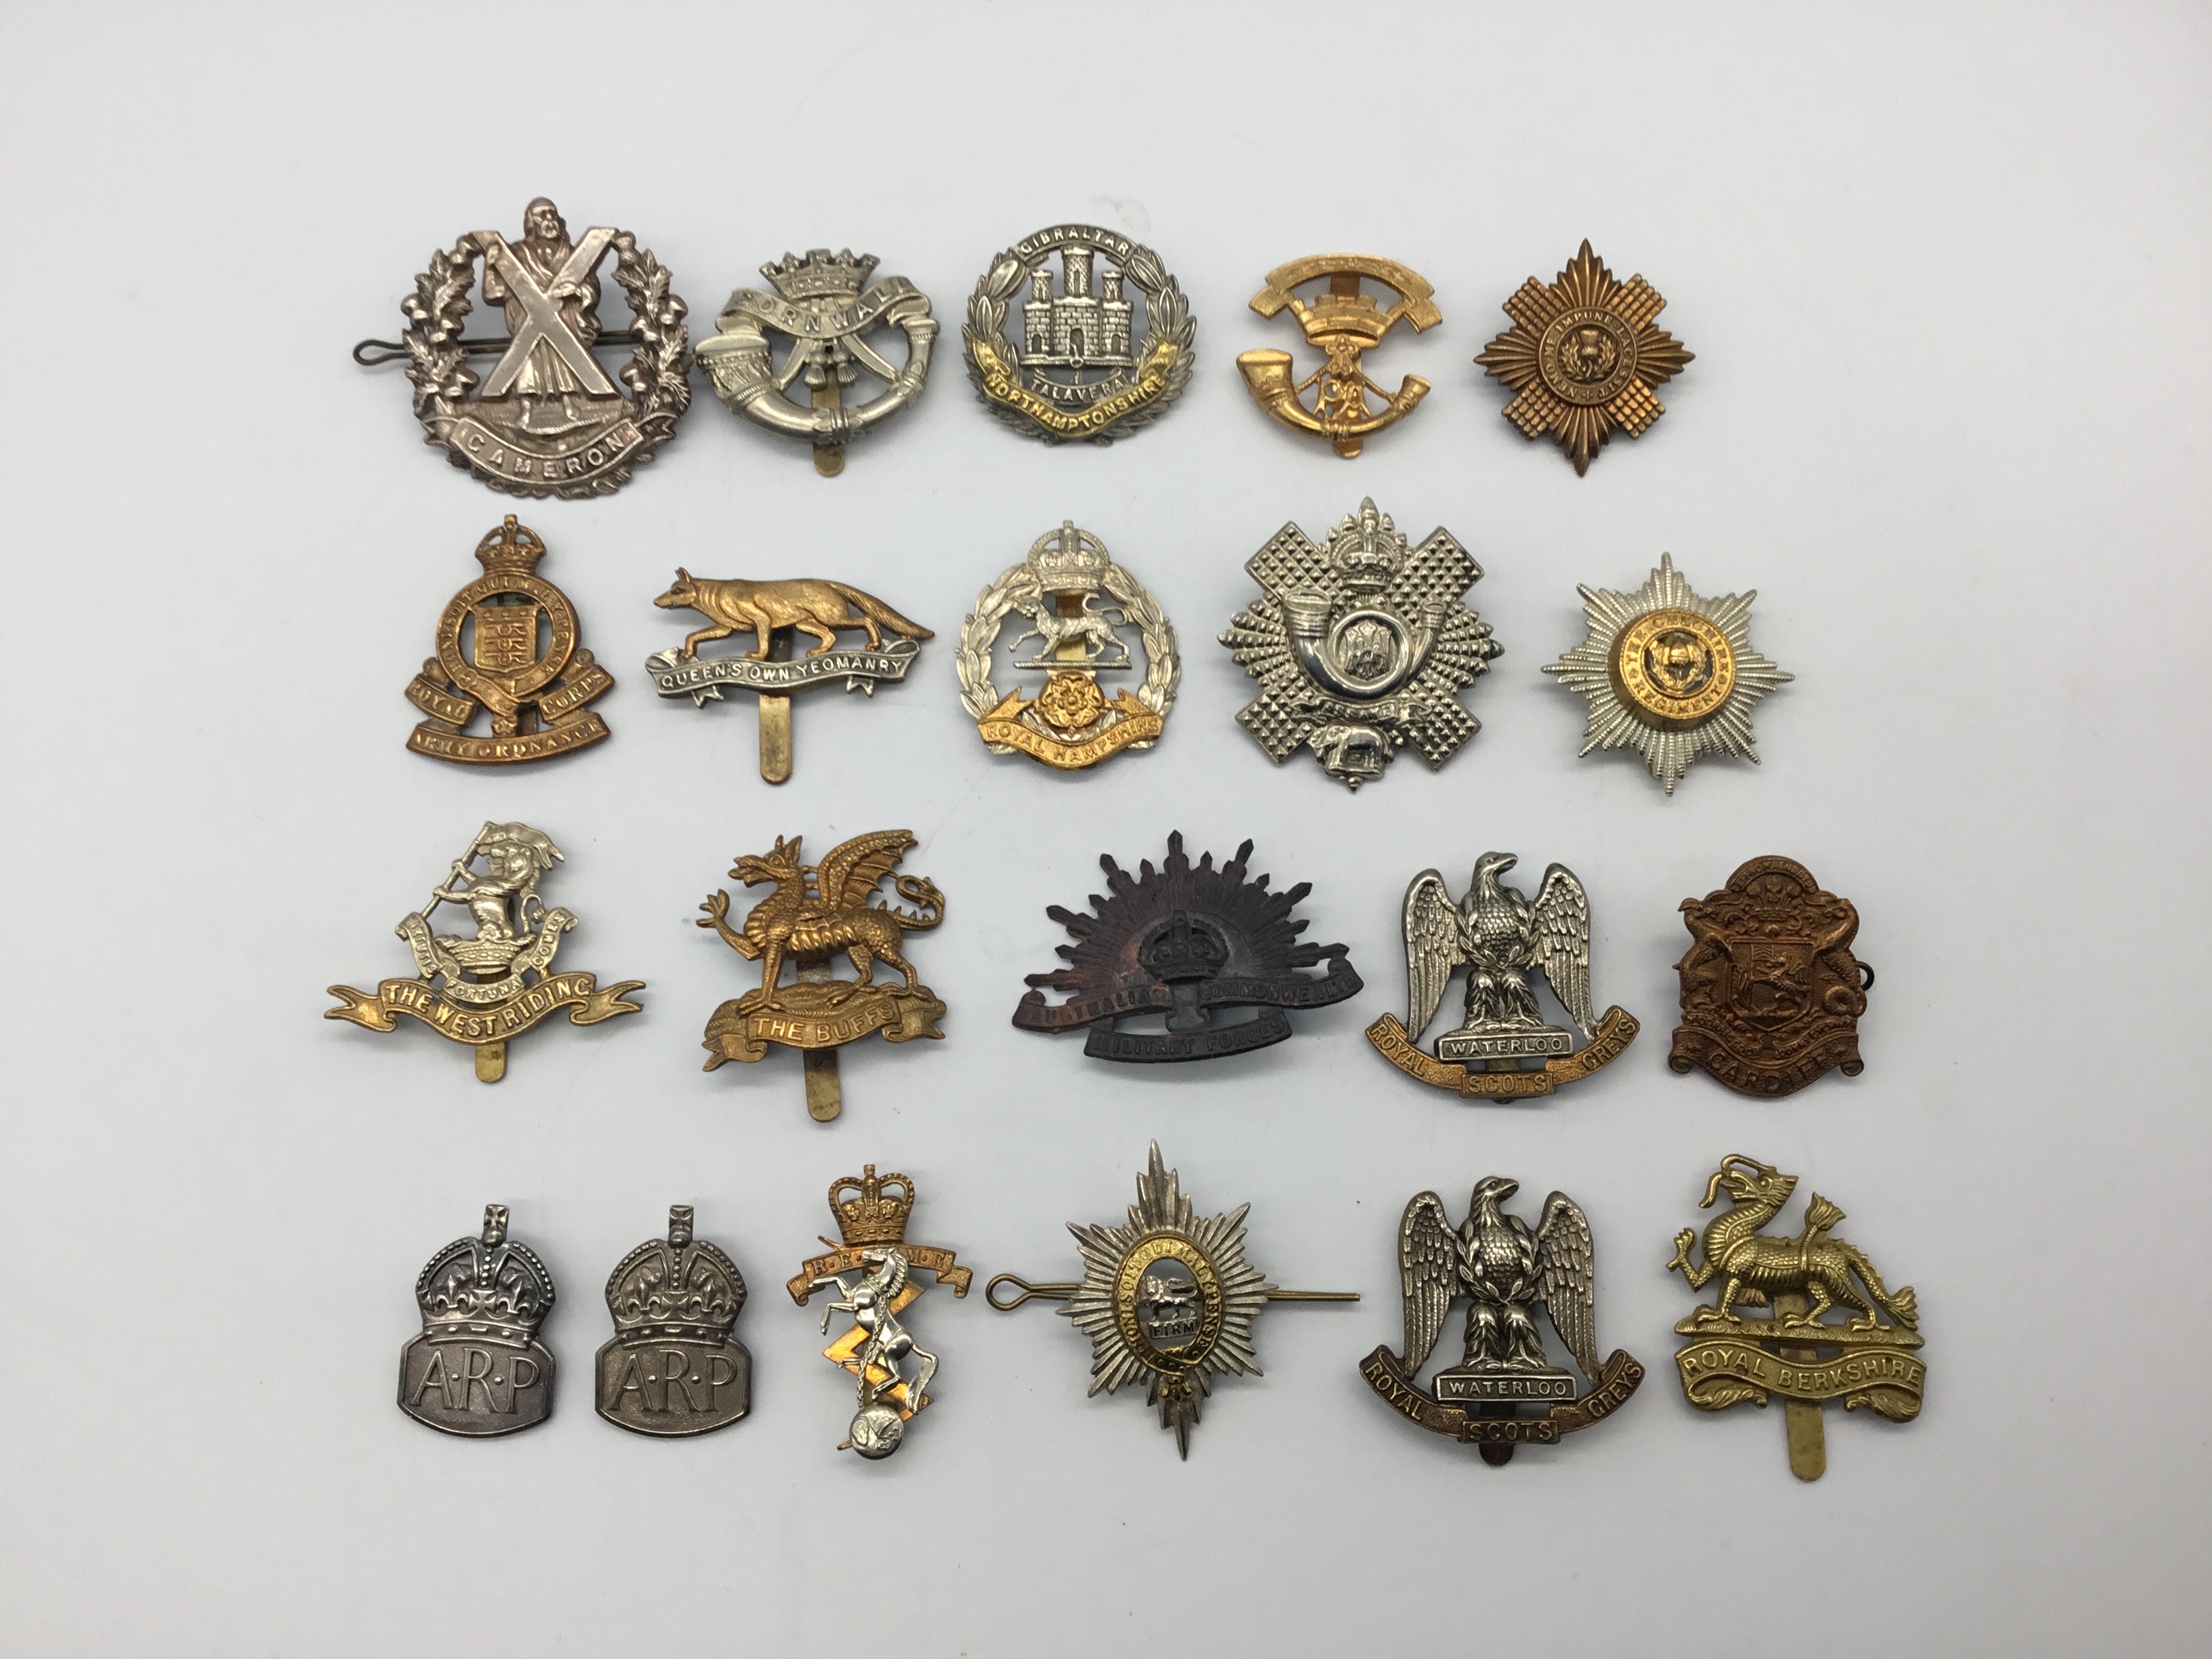 A quantity of WW1, WW2 and later British regimental cap badges, plus some sterling silver WW2 ARP